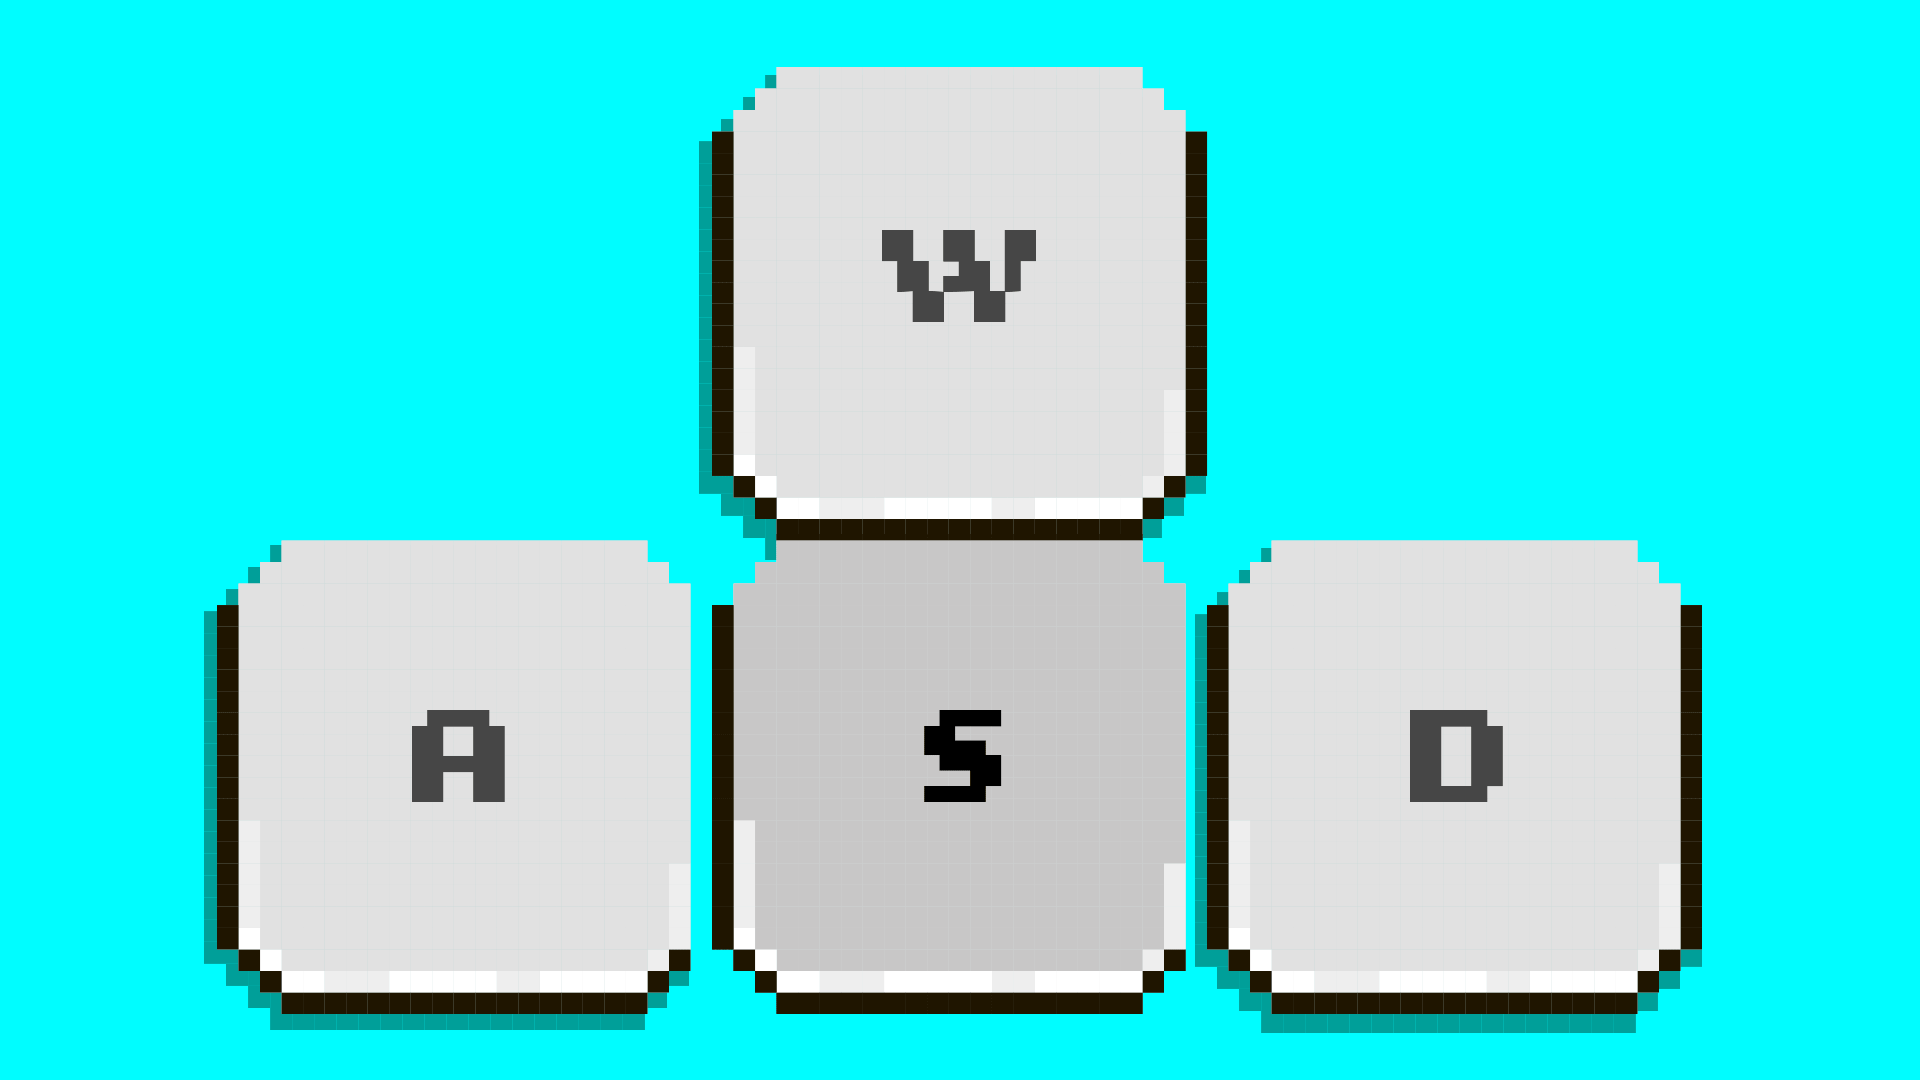 Animated GIF of the WASD buttons